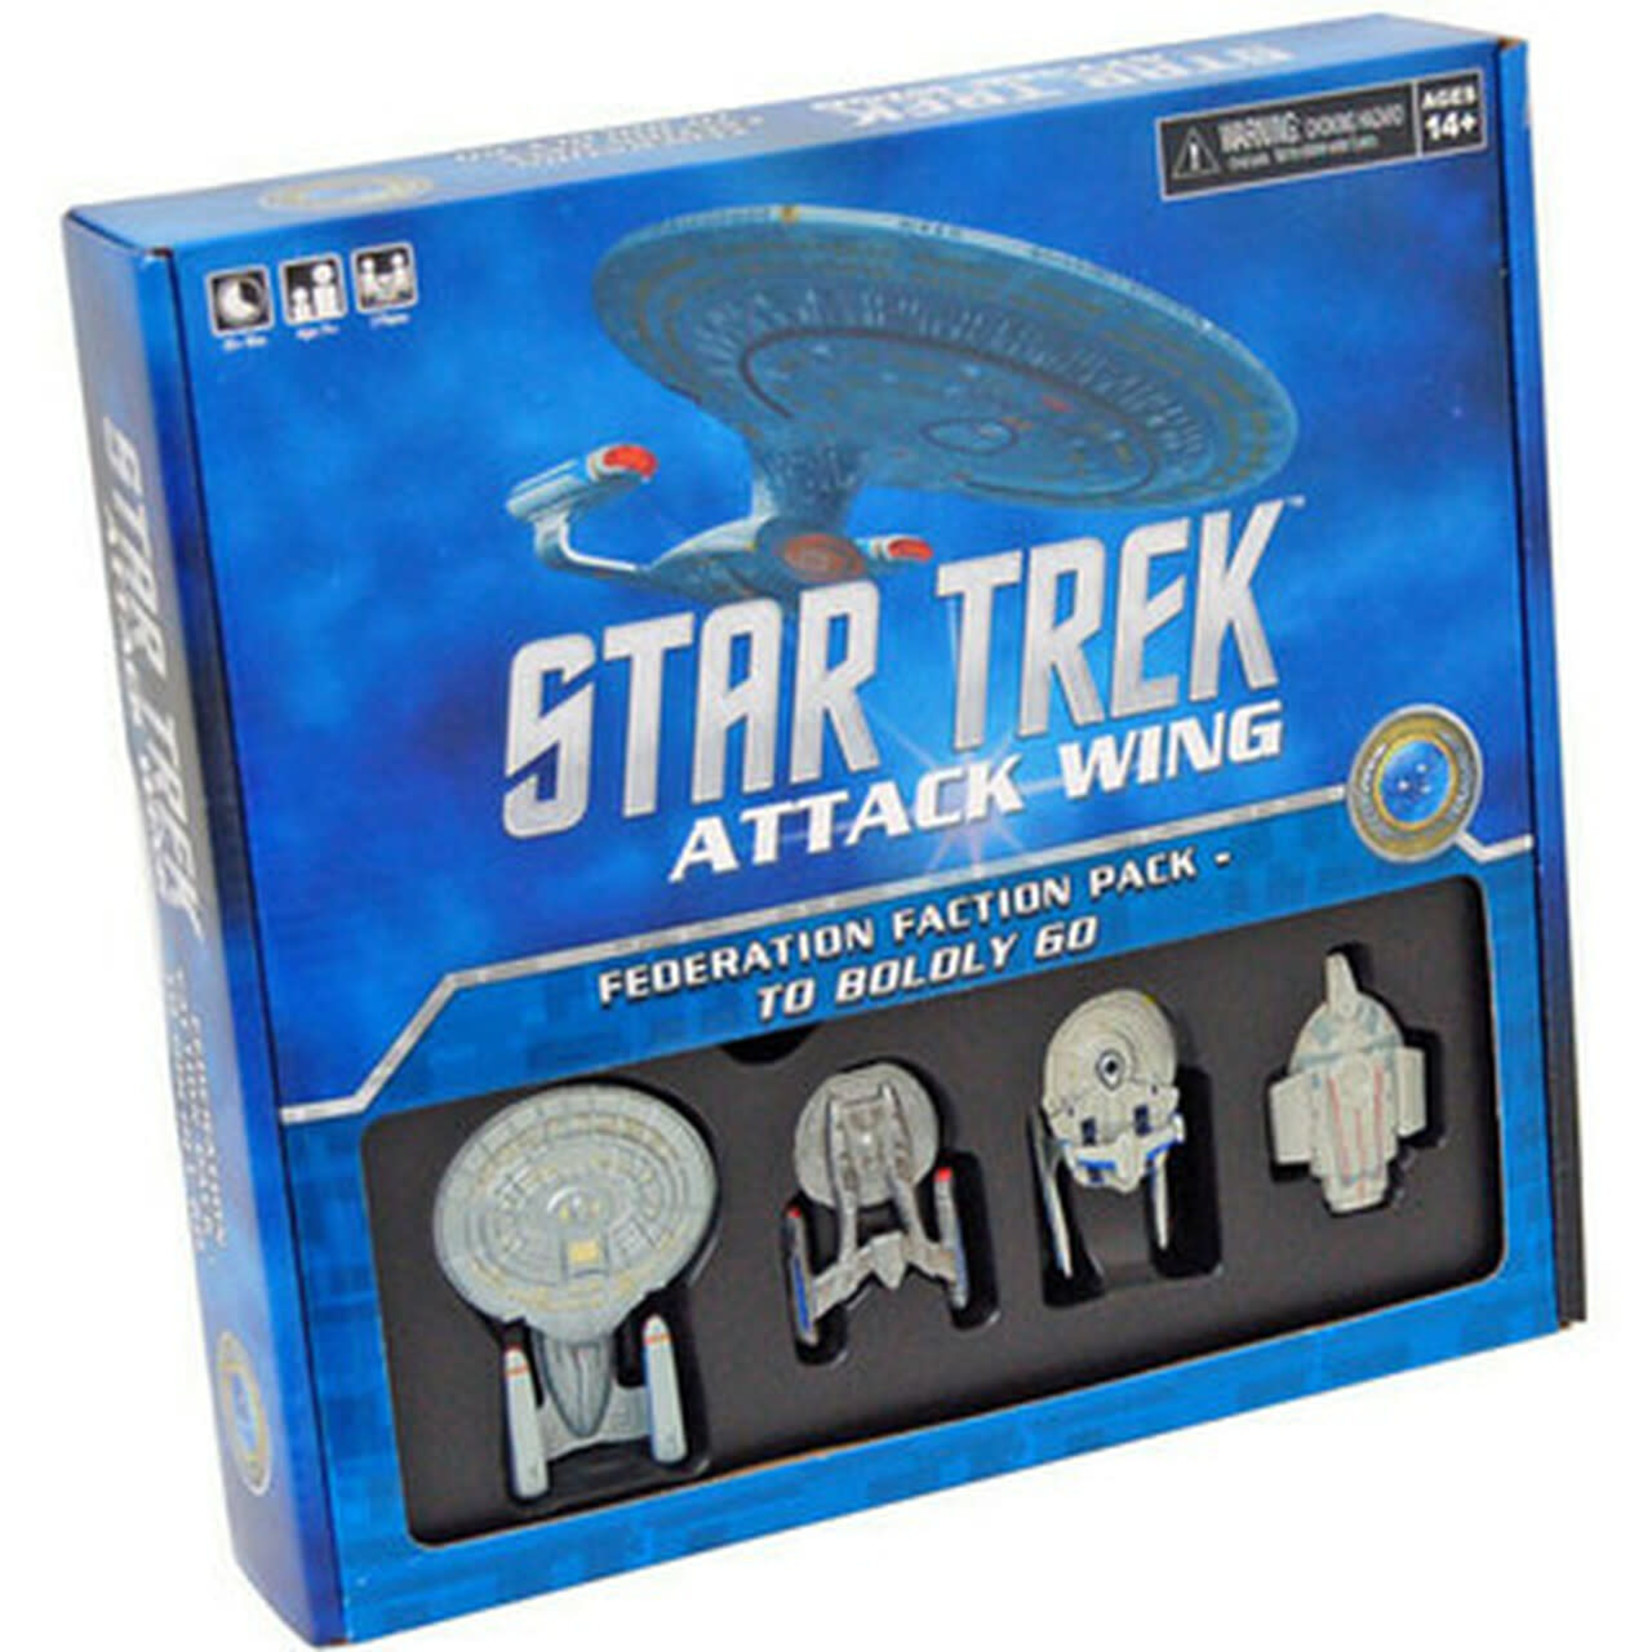 WizKids Star Trek Attack Wing Federation Faction Pack To Boldly Go